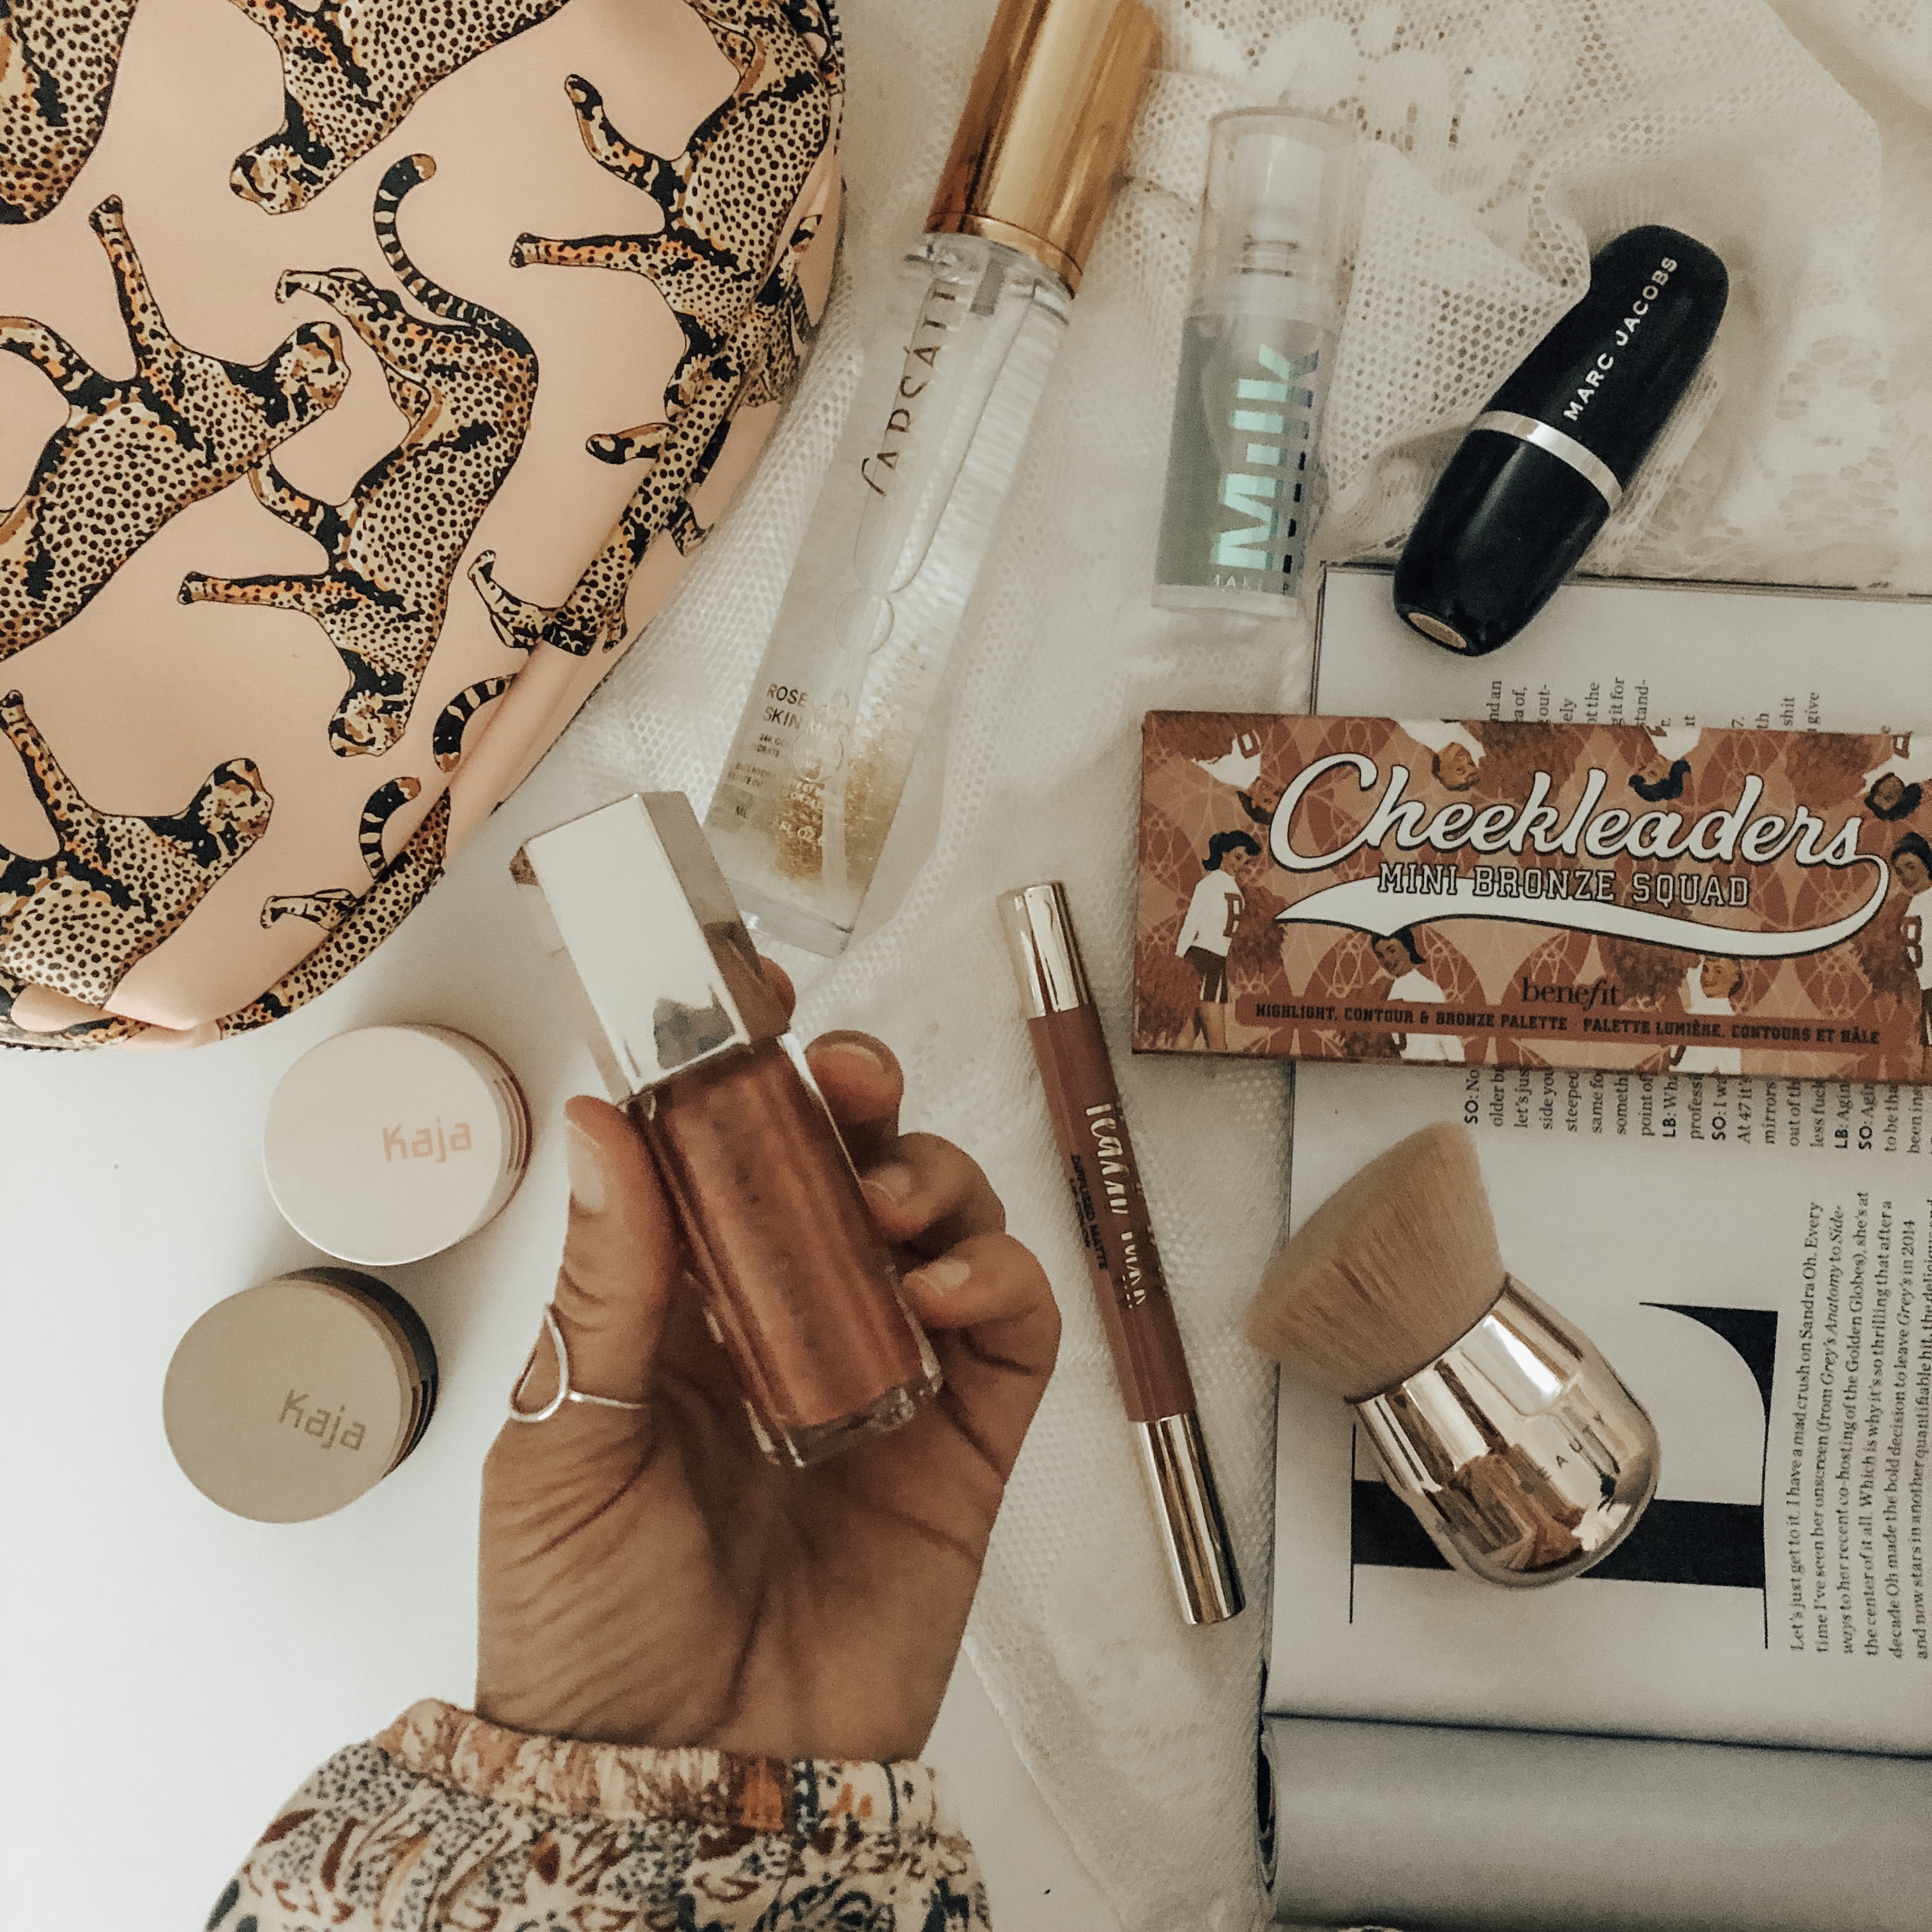 SPRING MAKEUP REFRESH WITH SEPHORA INSIDE JCPENNEY- Jaclyn De Leon Style + Have you updated your makeup for Spring and Summer? There is all new and exclusive Sephora makeup products with all the pink, gold and shimmer you need.